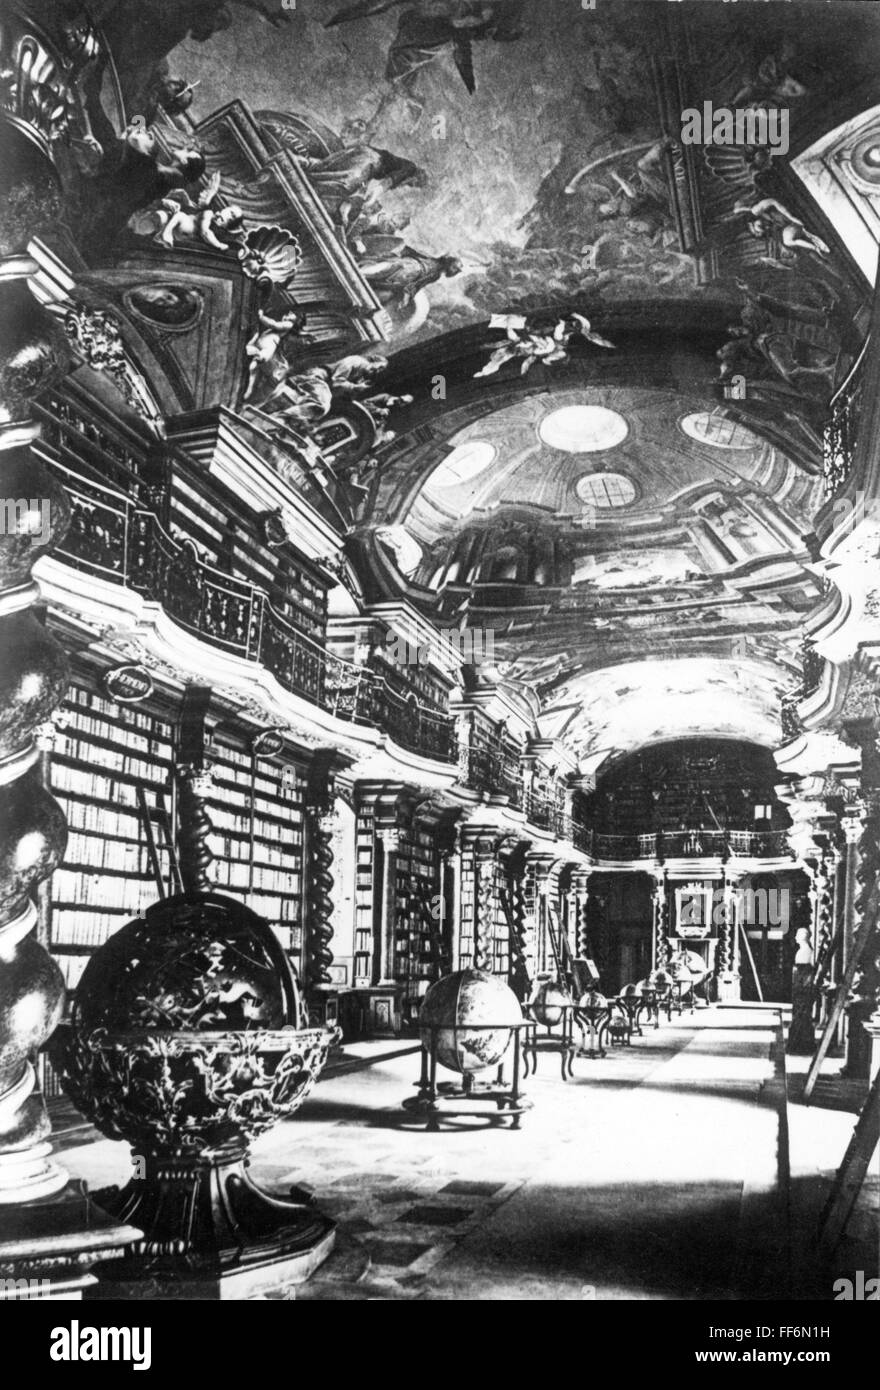 geography / travel, Czechia, Prague, building, university, Clementinum, interior view, national library, 20th century, 20th century, bookshelf, bookshelves, shelf, shelves, book, books, globe, globes, hall, halls, mural painting, wall painting, murals, mural paintings, wall paintings, wallpainting, wallpaintings, art of painting, fine arts, art, ornament, ornaments, Eastern Europe, Europe, architecture, Czechia, Czech Republic, Prague, Praha, building, buildings, university, universities, national library, national libraries, historic, historical, Additional-Rights-Clearences-Not Available Stock Photo